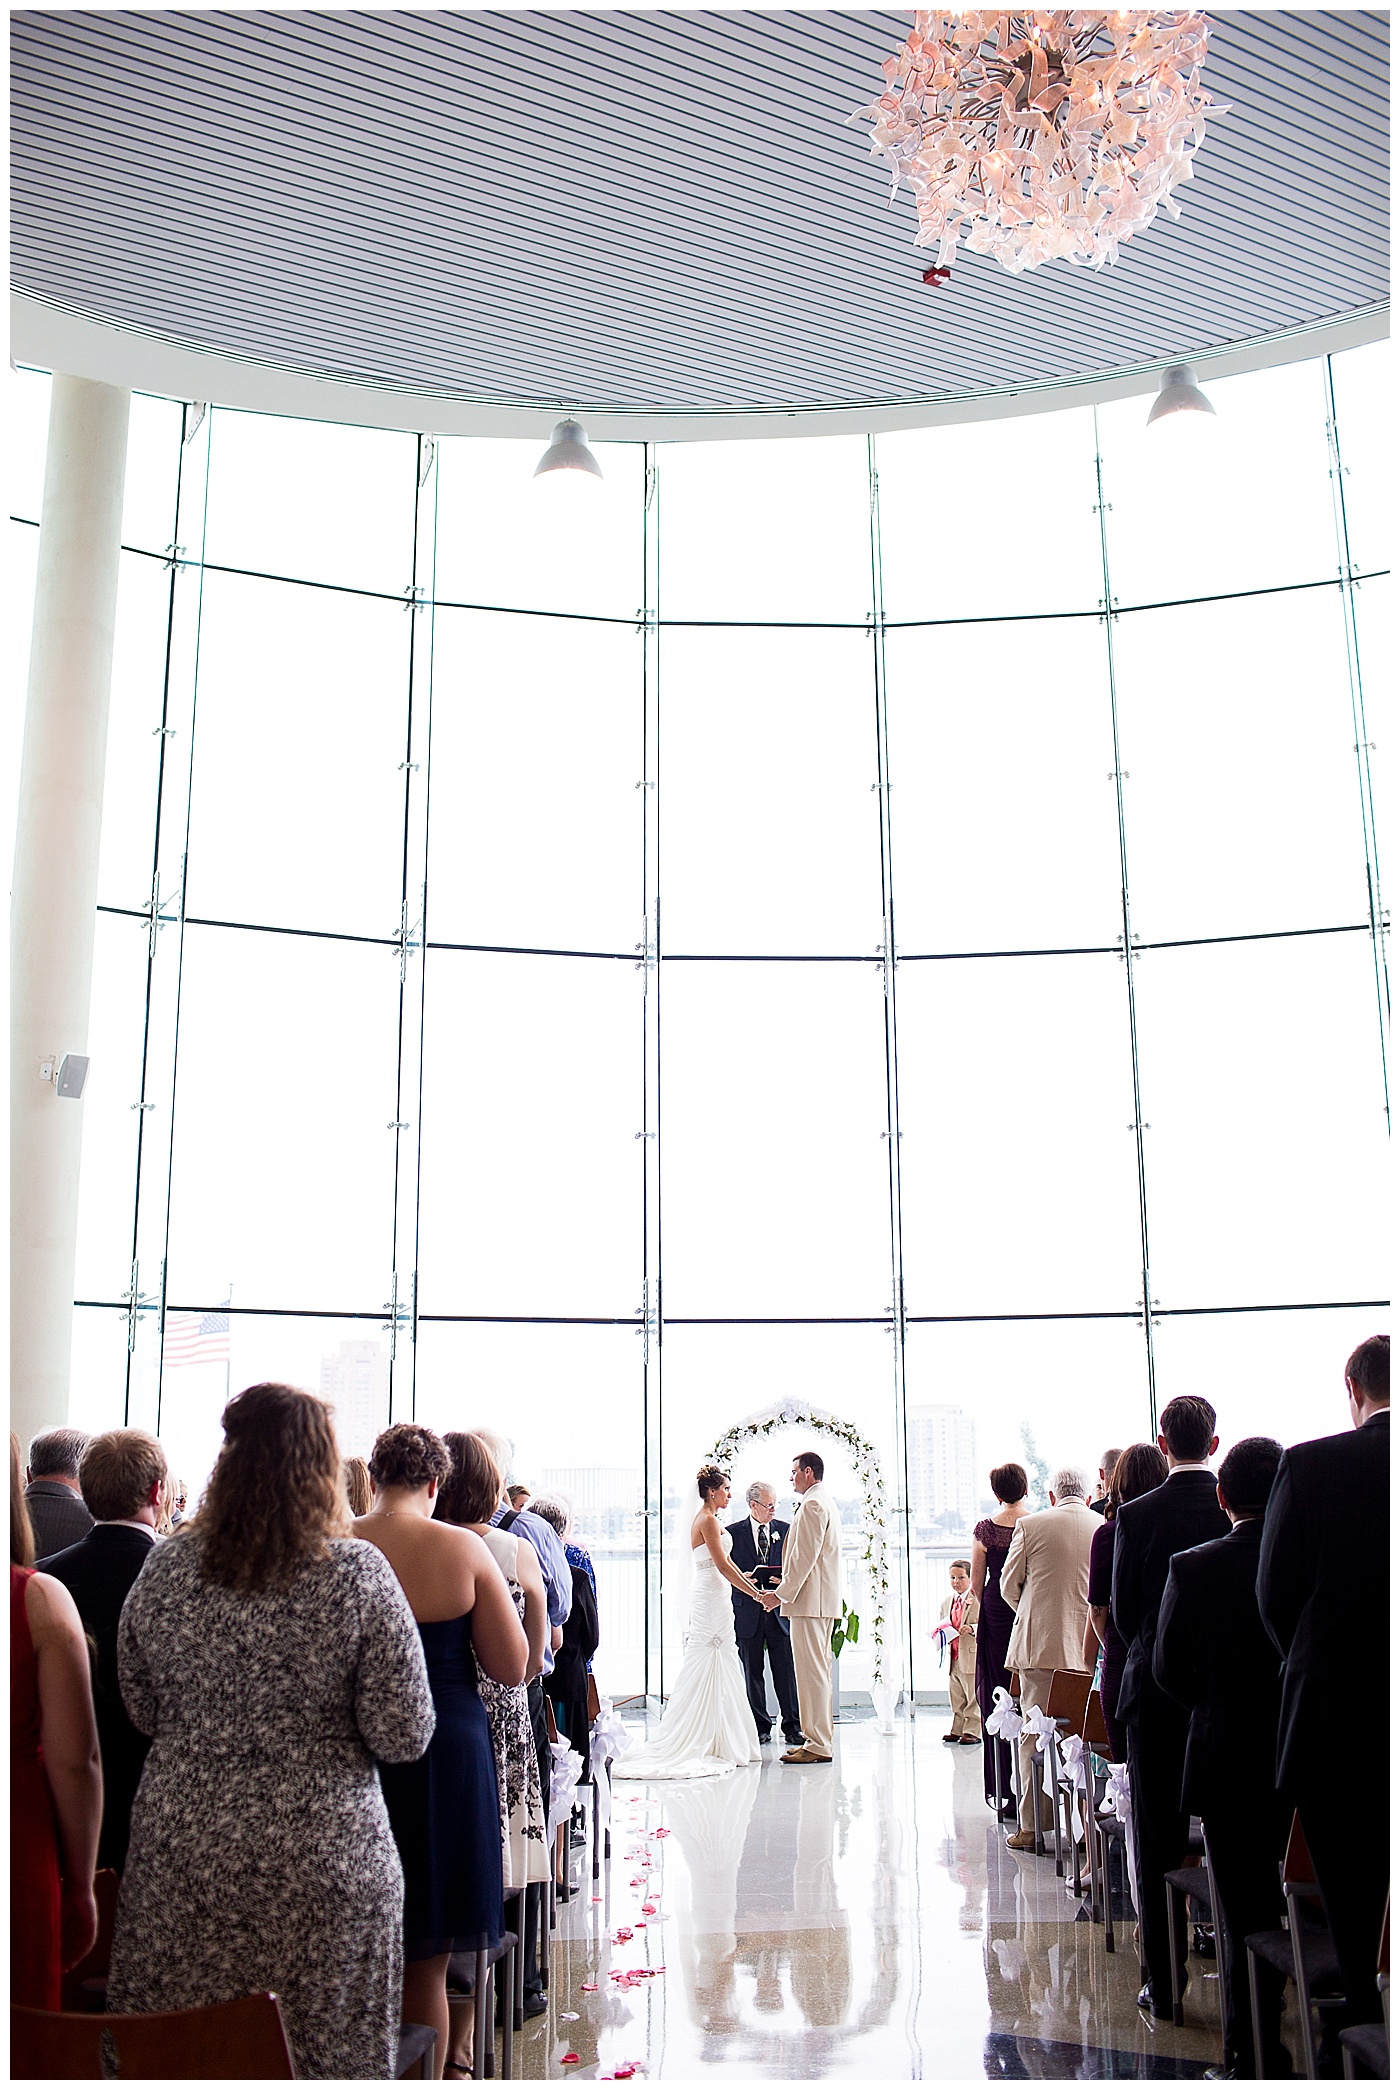 Tracey and Richard are Married!!  A Half Moone Cruise and Celebration Center wedding in Norfolk